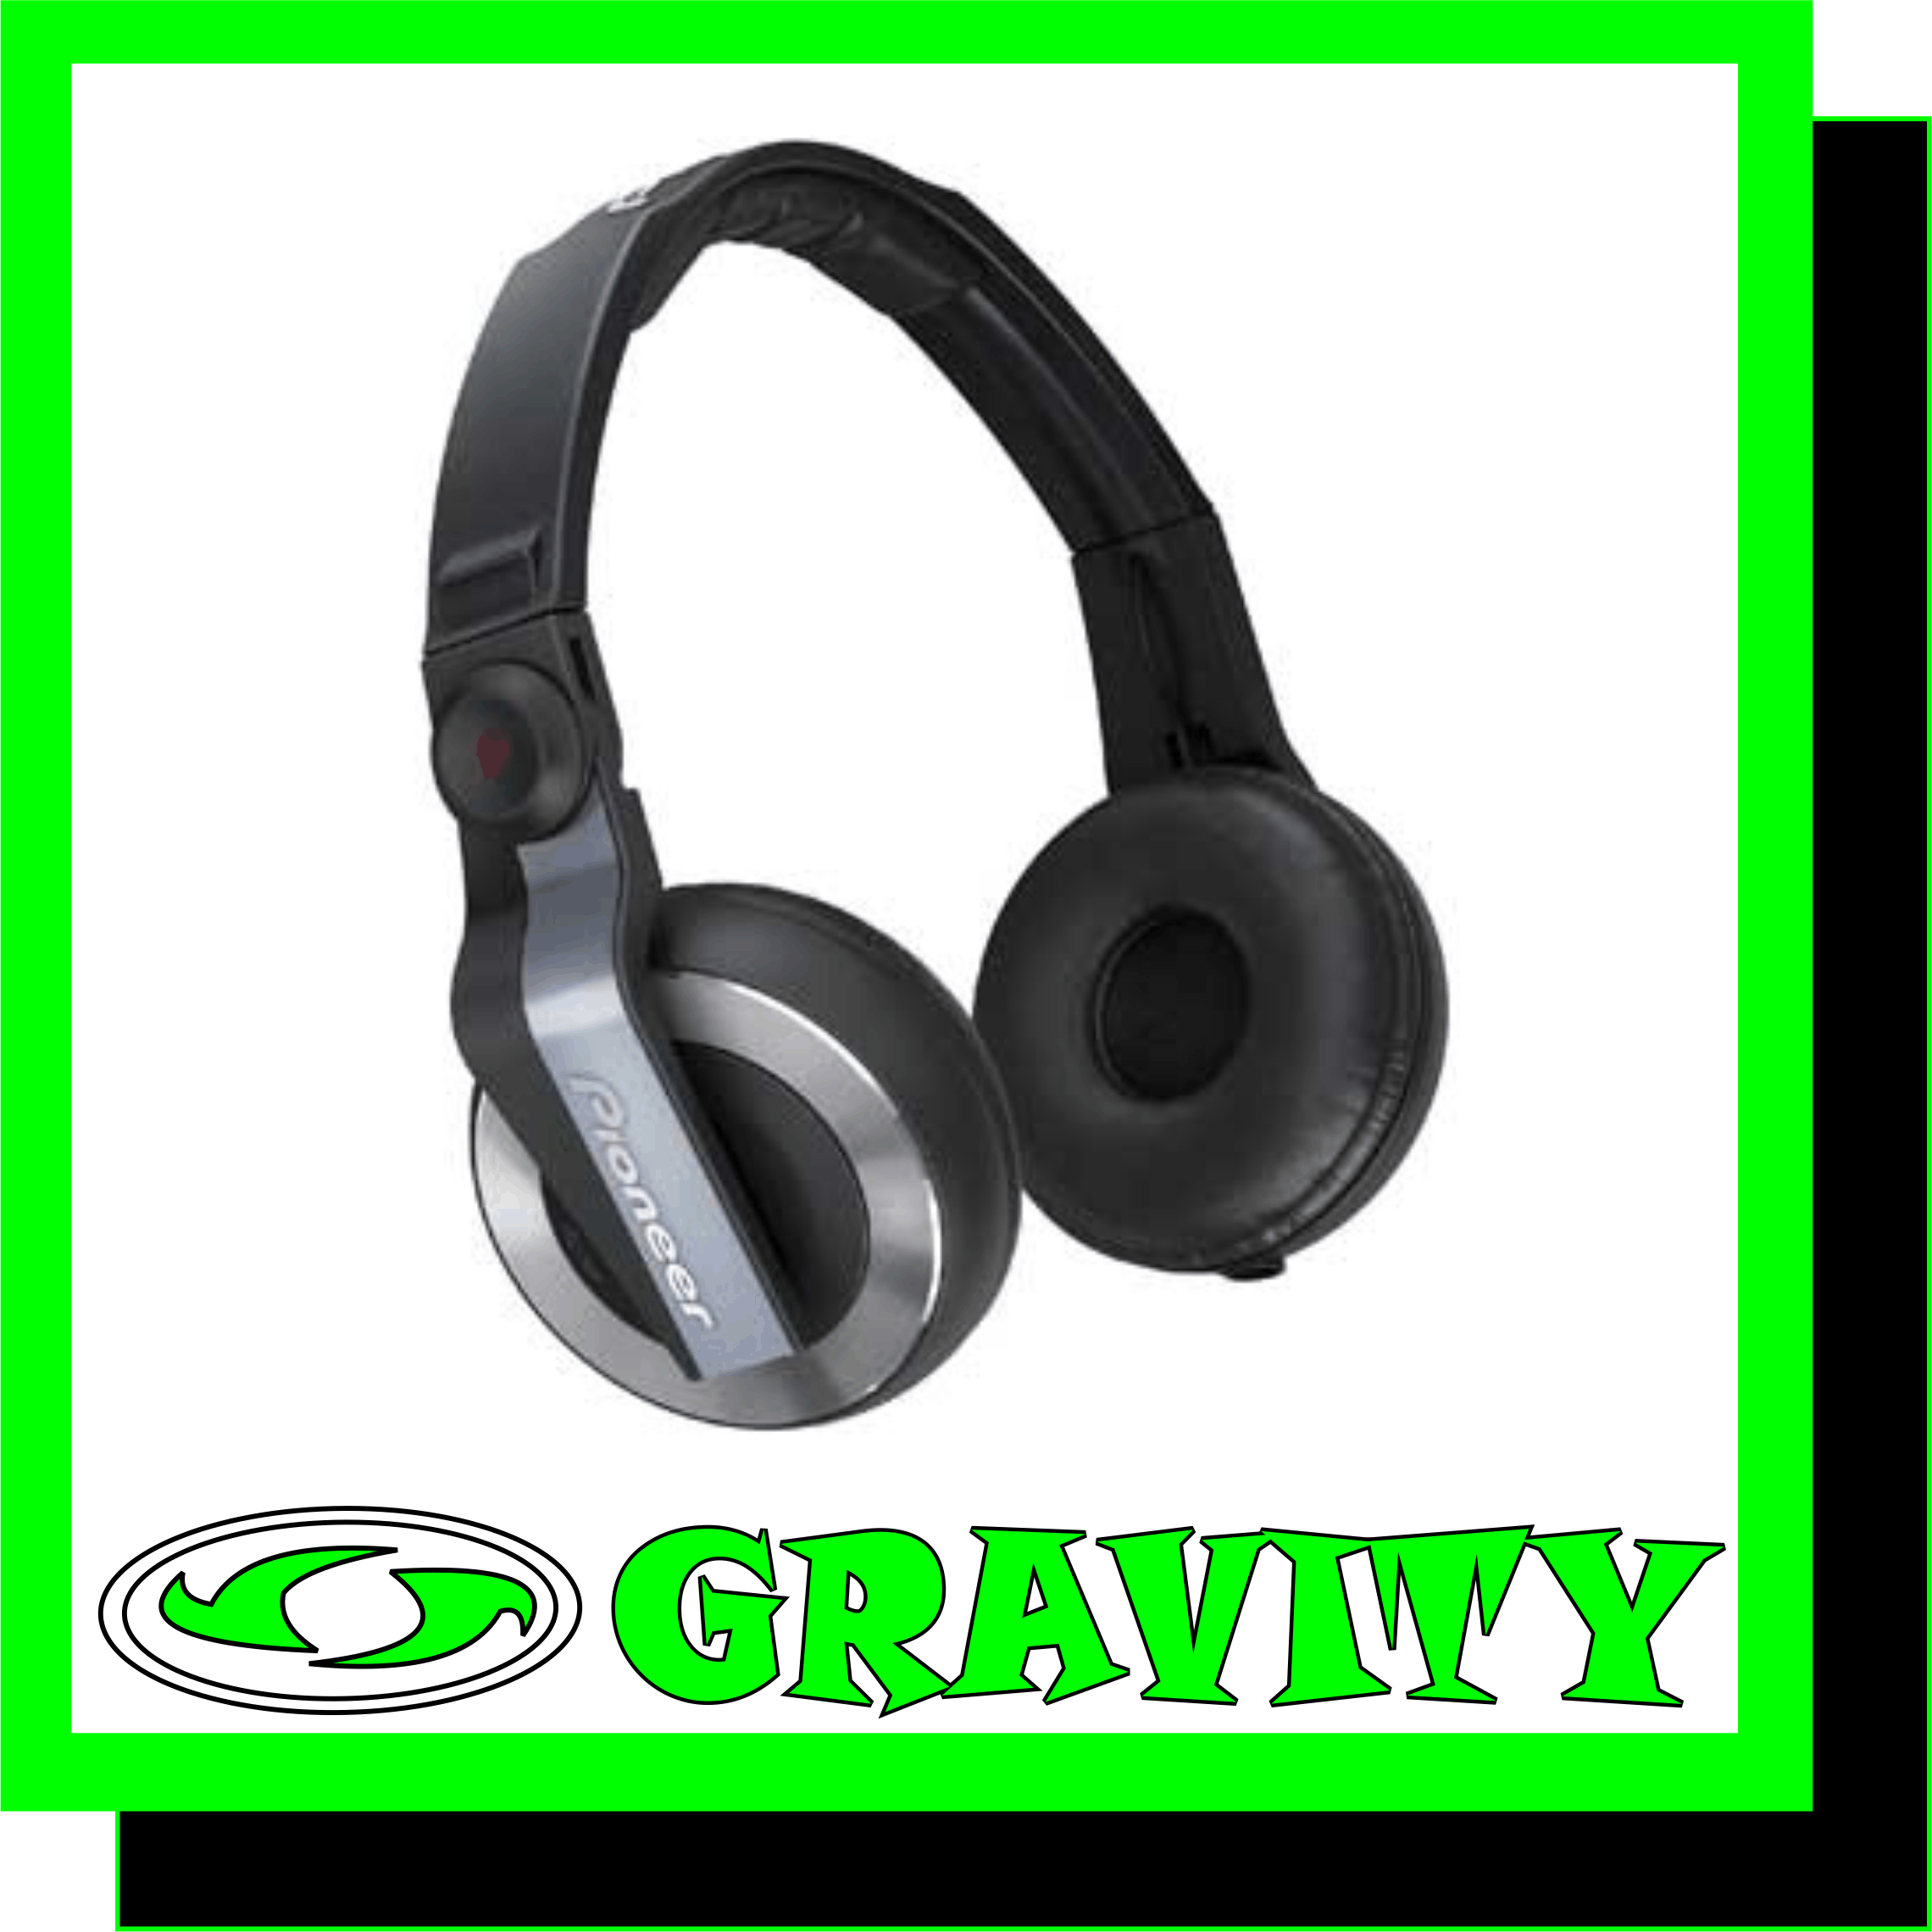 HDJ500K @ R2 350.00  DJ Headphones   Refined Design for Maximum Comfort & Reliability Advanced Sound Quality with low & mid ranges Right earpiece rotates forward and back up to 60 degrees Includes 1m straight leisure cord & coiled DJing cord GRAVITY DJ STORE 0315072463